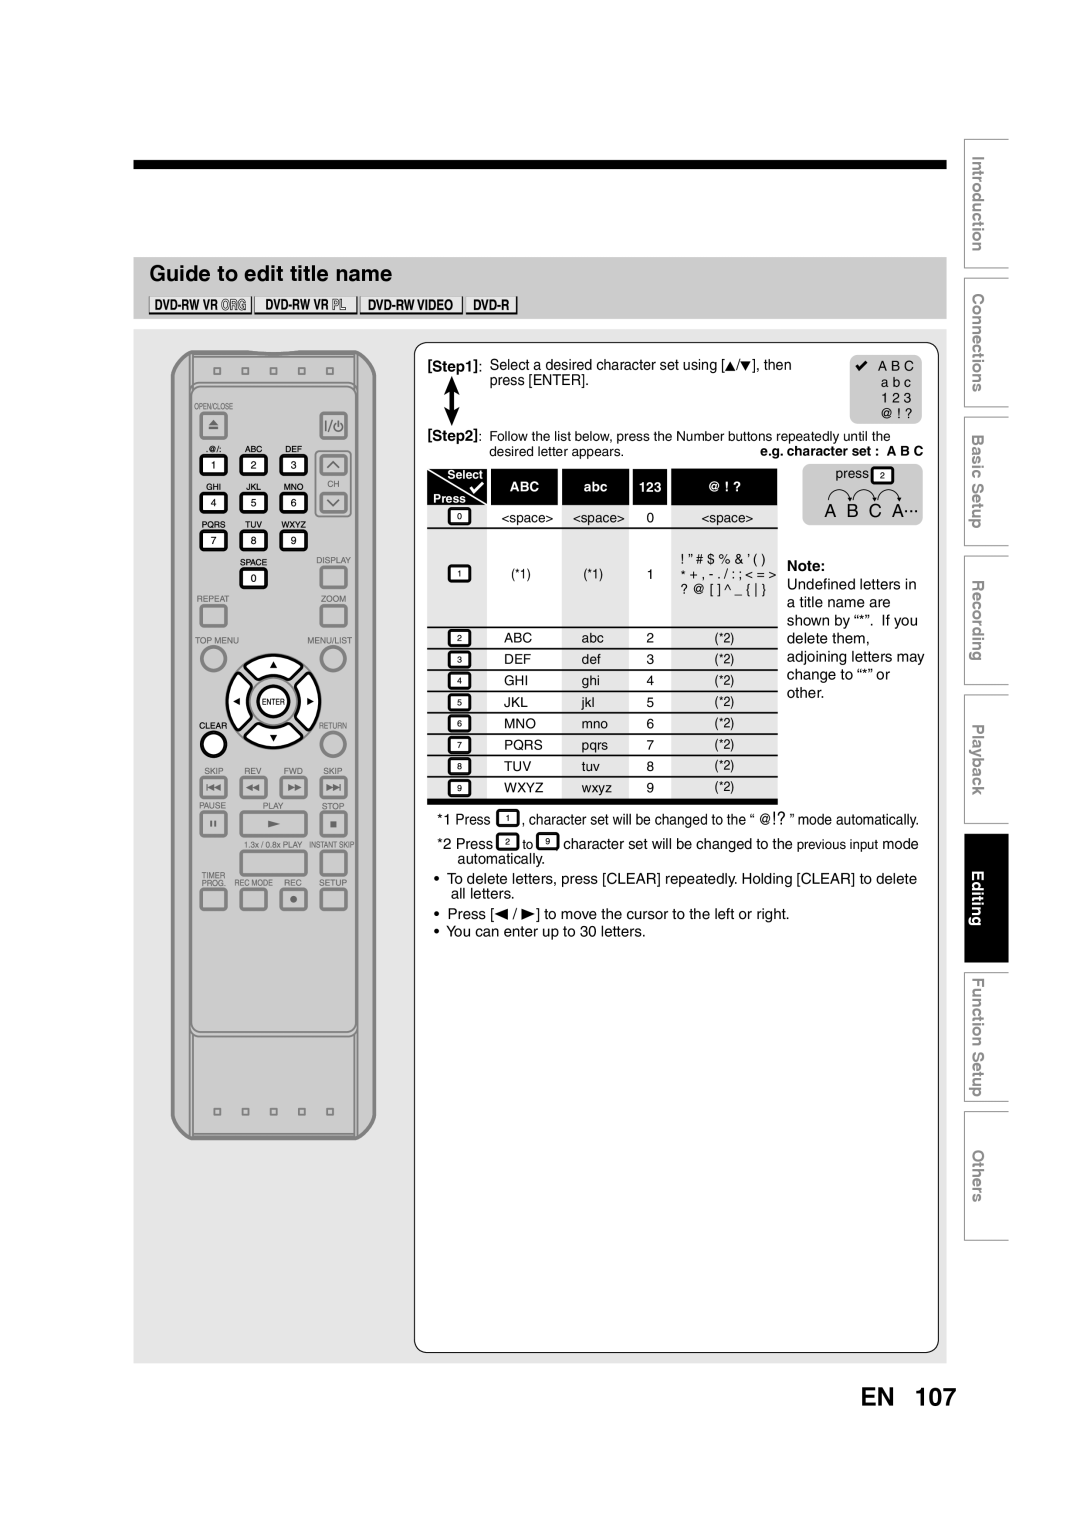 Toshiba D-RW2SU/D-RW2SC manual Guide to edit title name, A B C A, Recording Playback, Editing Function Setup Others 